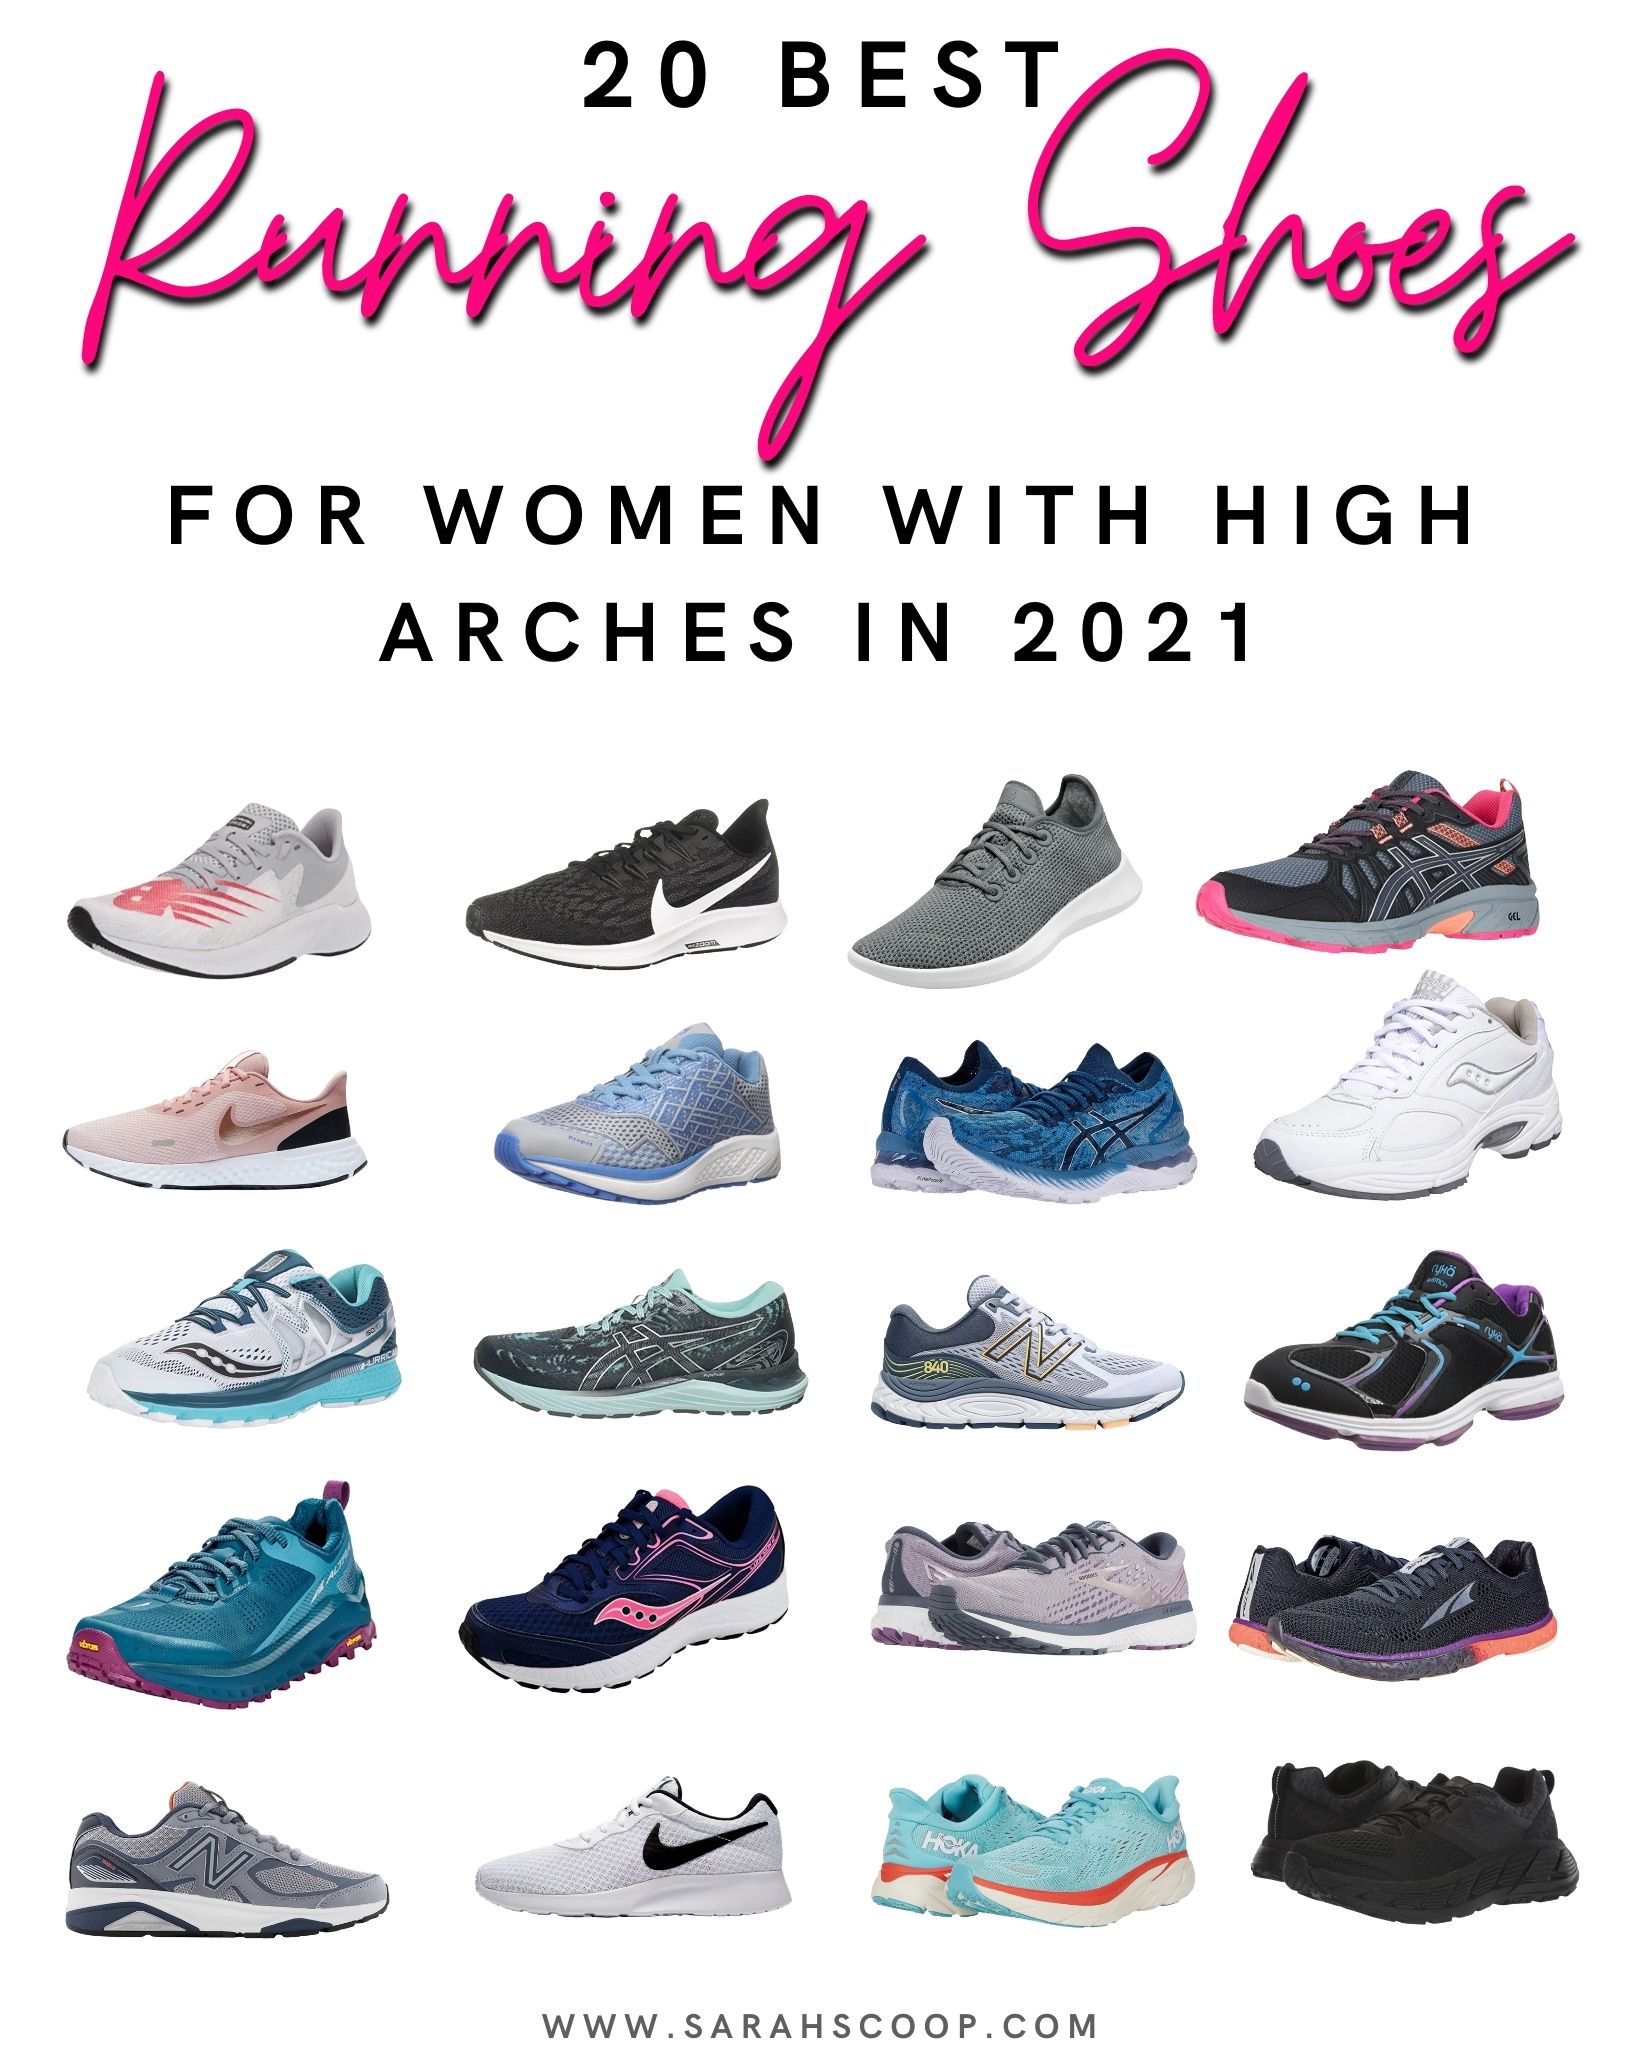 20 Best Running Shoes For Women with High Arches 2021 - Sarah Scoop